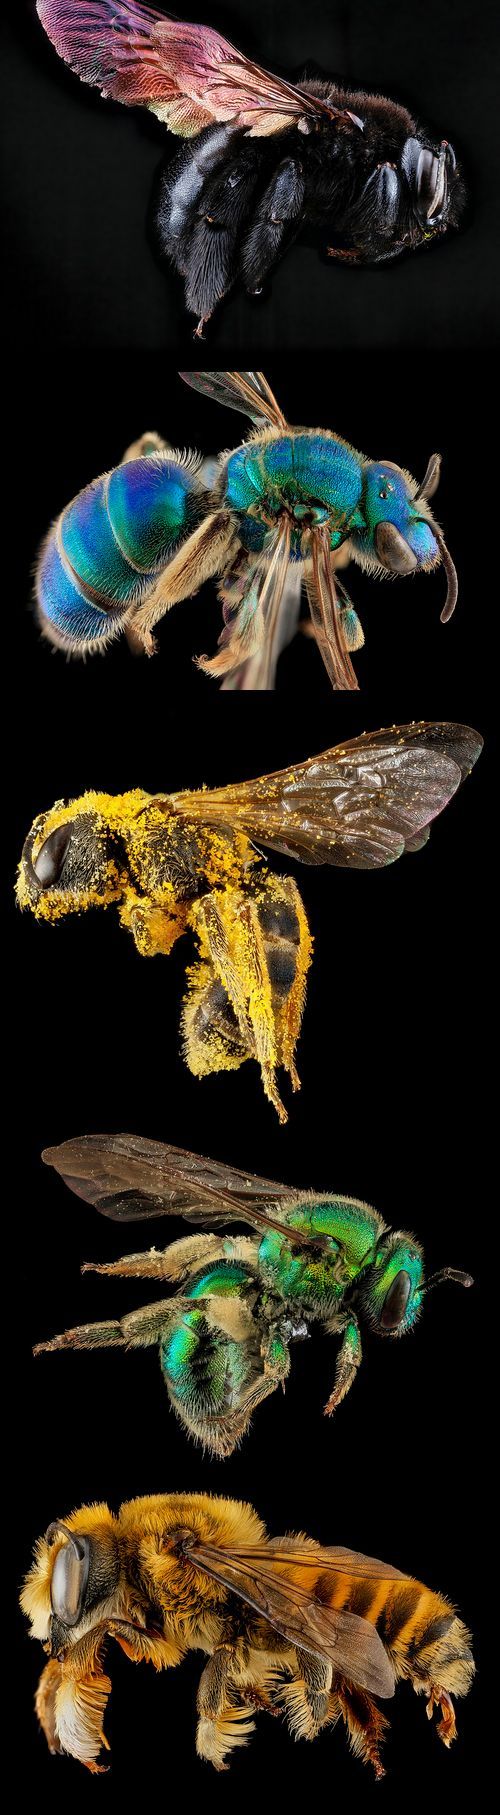 Macro bee portraits by Sam Droege.  Used to distinguish and catalog the thousands of bee species in North America.